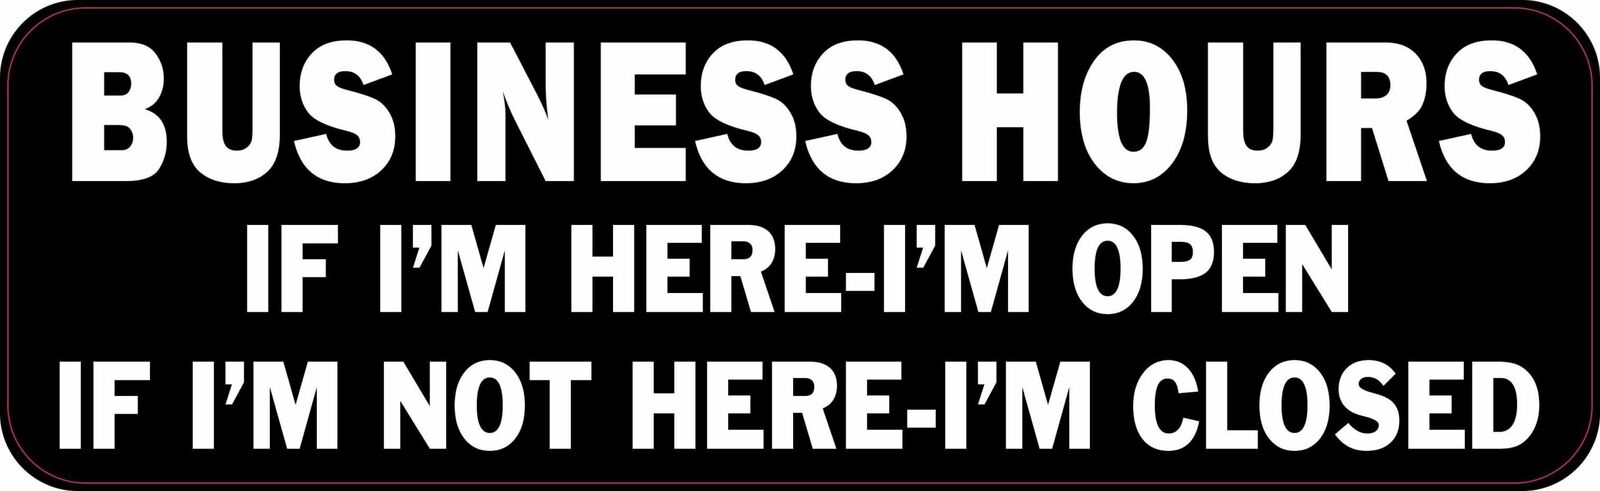 10in x 3in Business Hours Open If Im Here Vinyl Sticker Funny Decal Sign